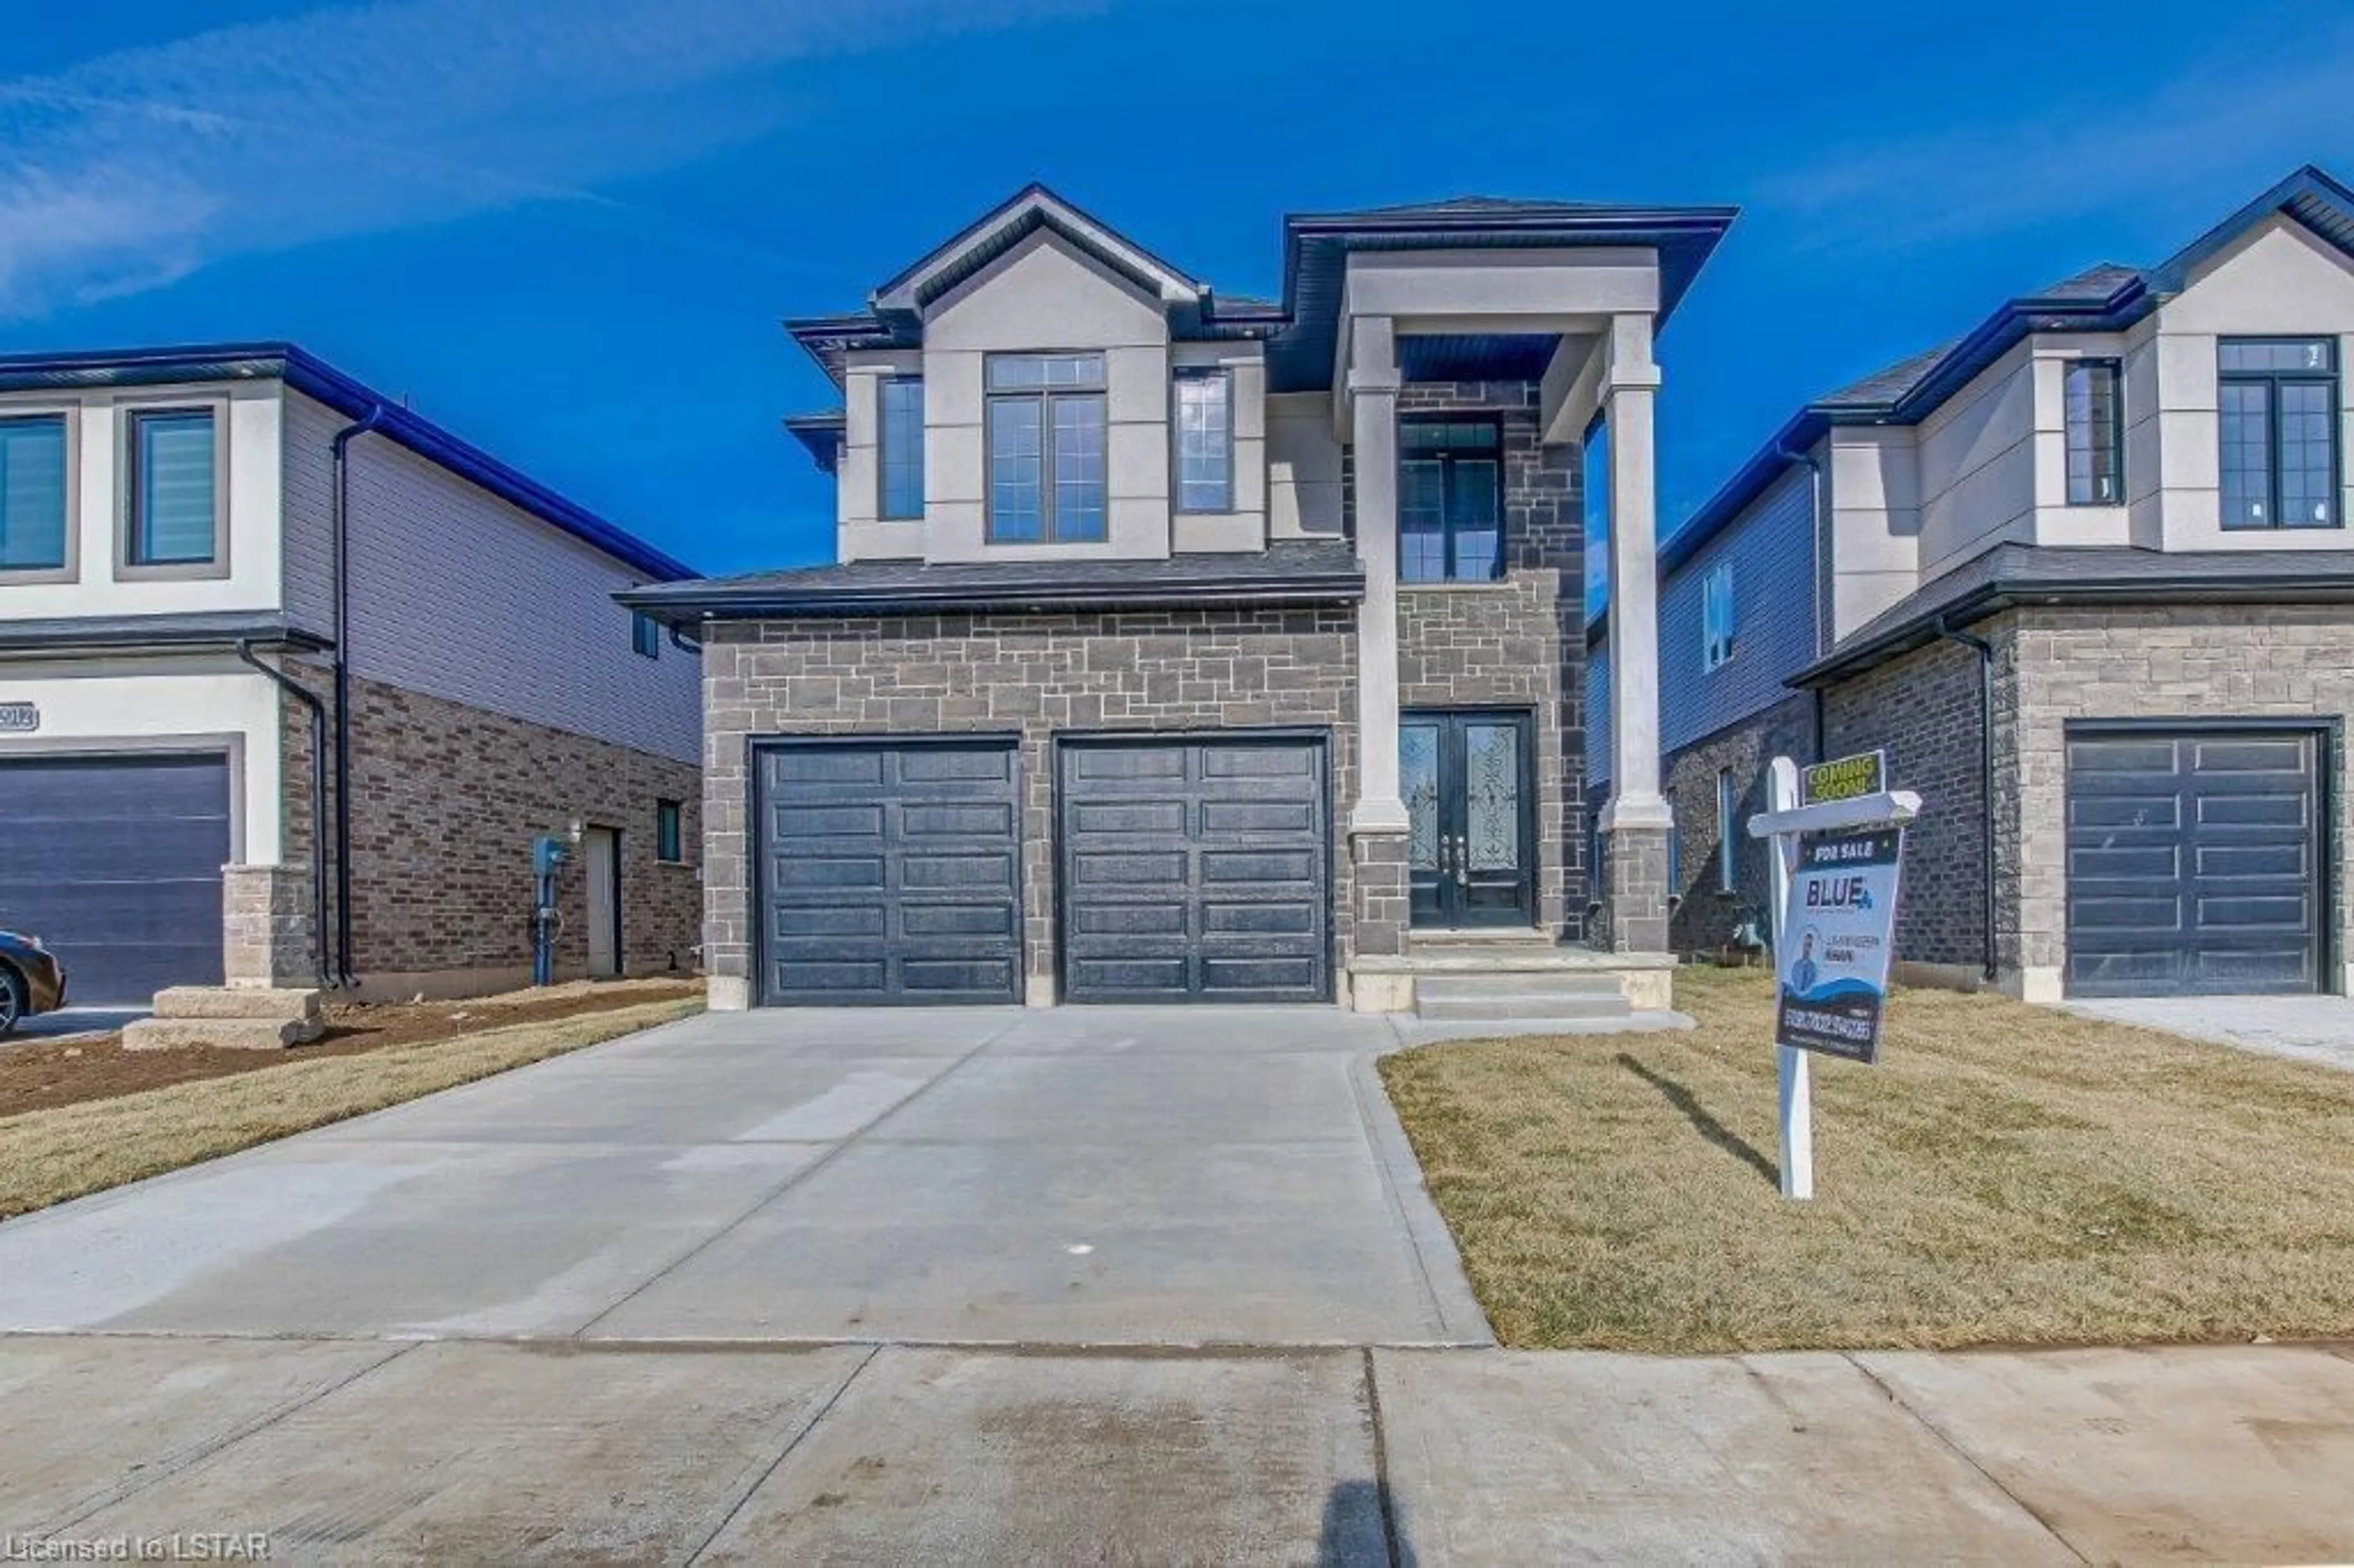 Home with brick exterior material for 2916 Lemieux Walk, London Ontario N6L 0H2